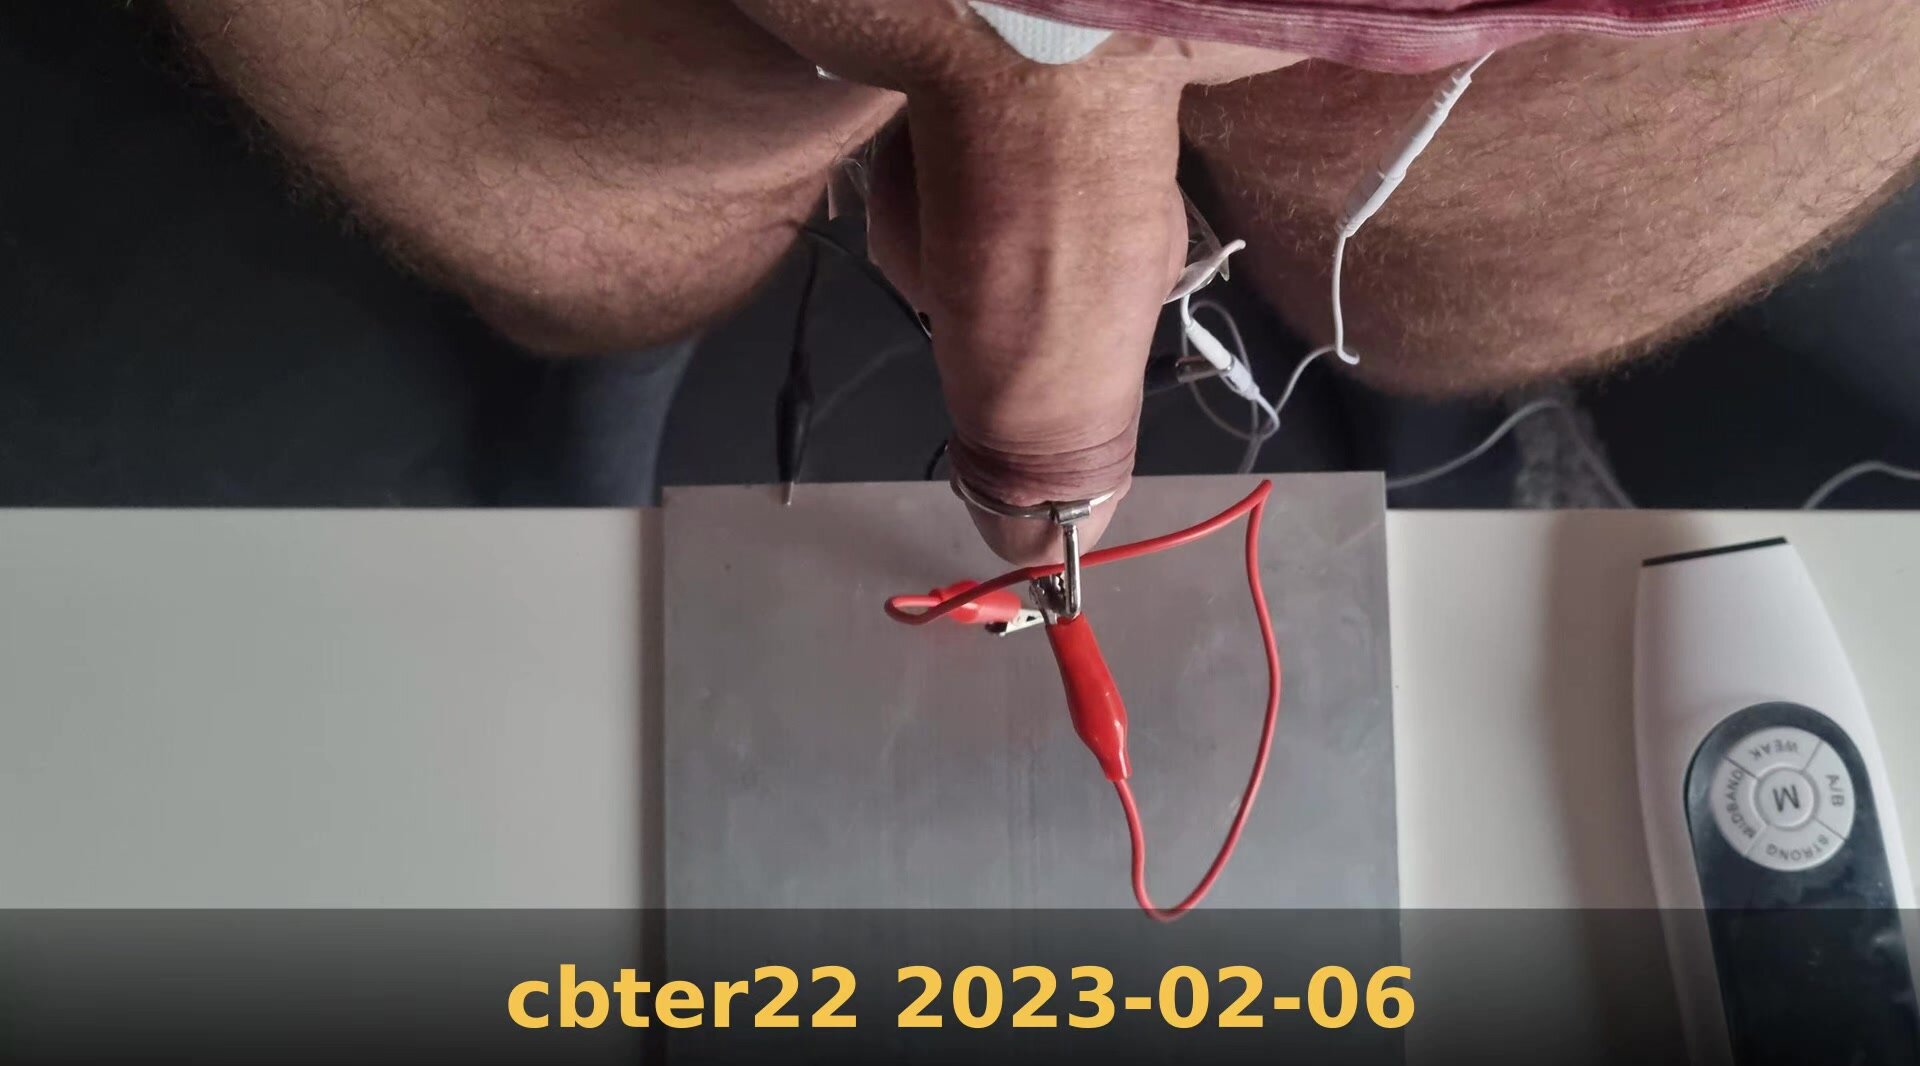 cbter22 - testing alternating current paths